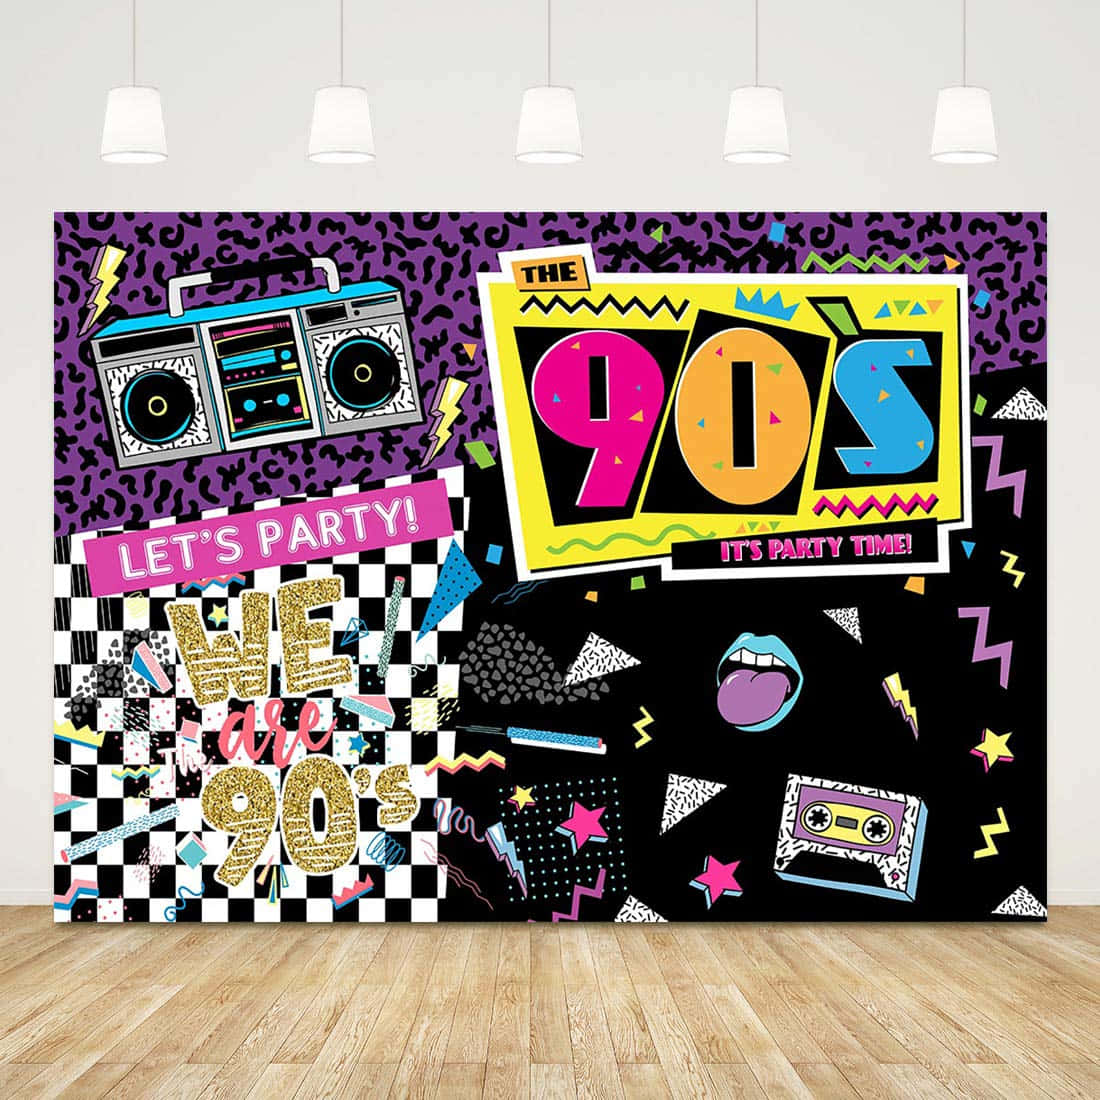 Experience the 90s with this nostalgic, vibrant theme